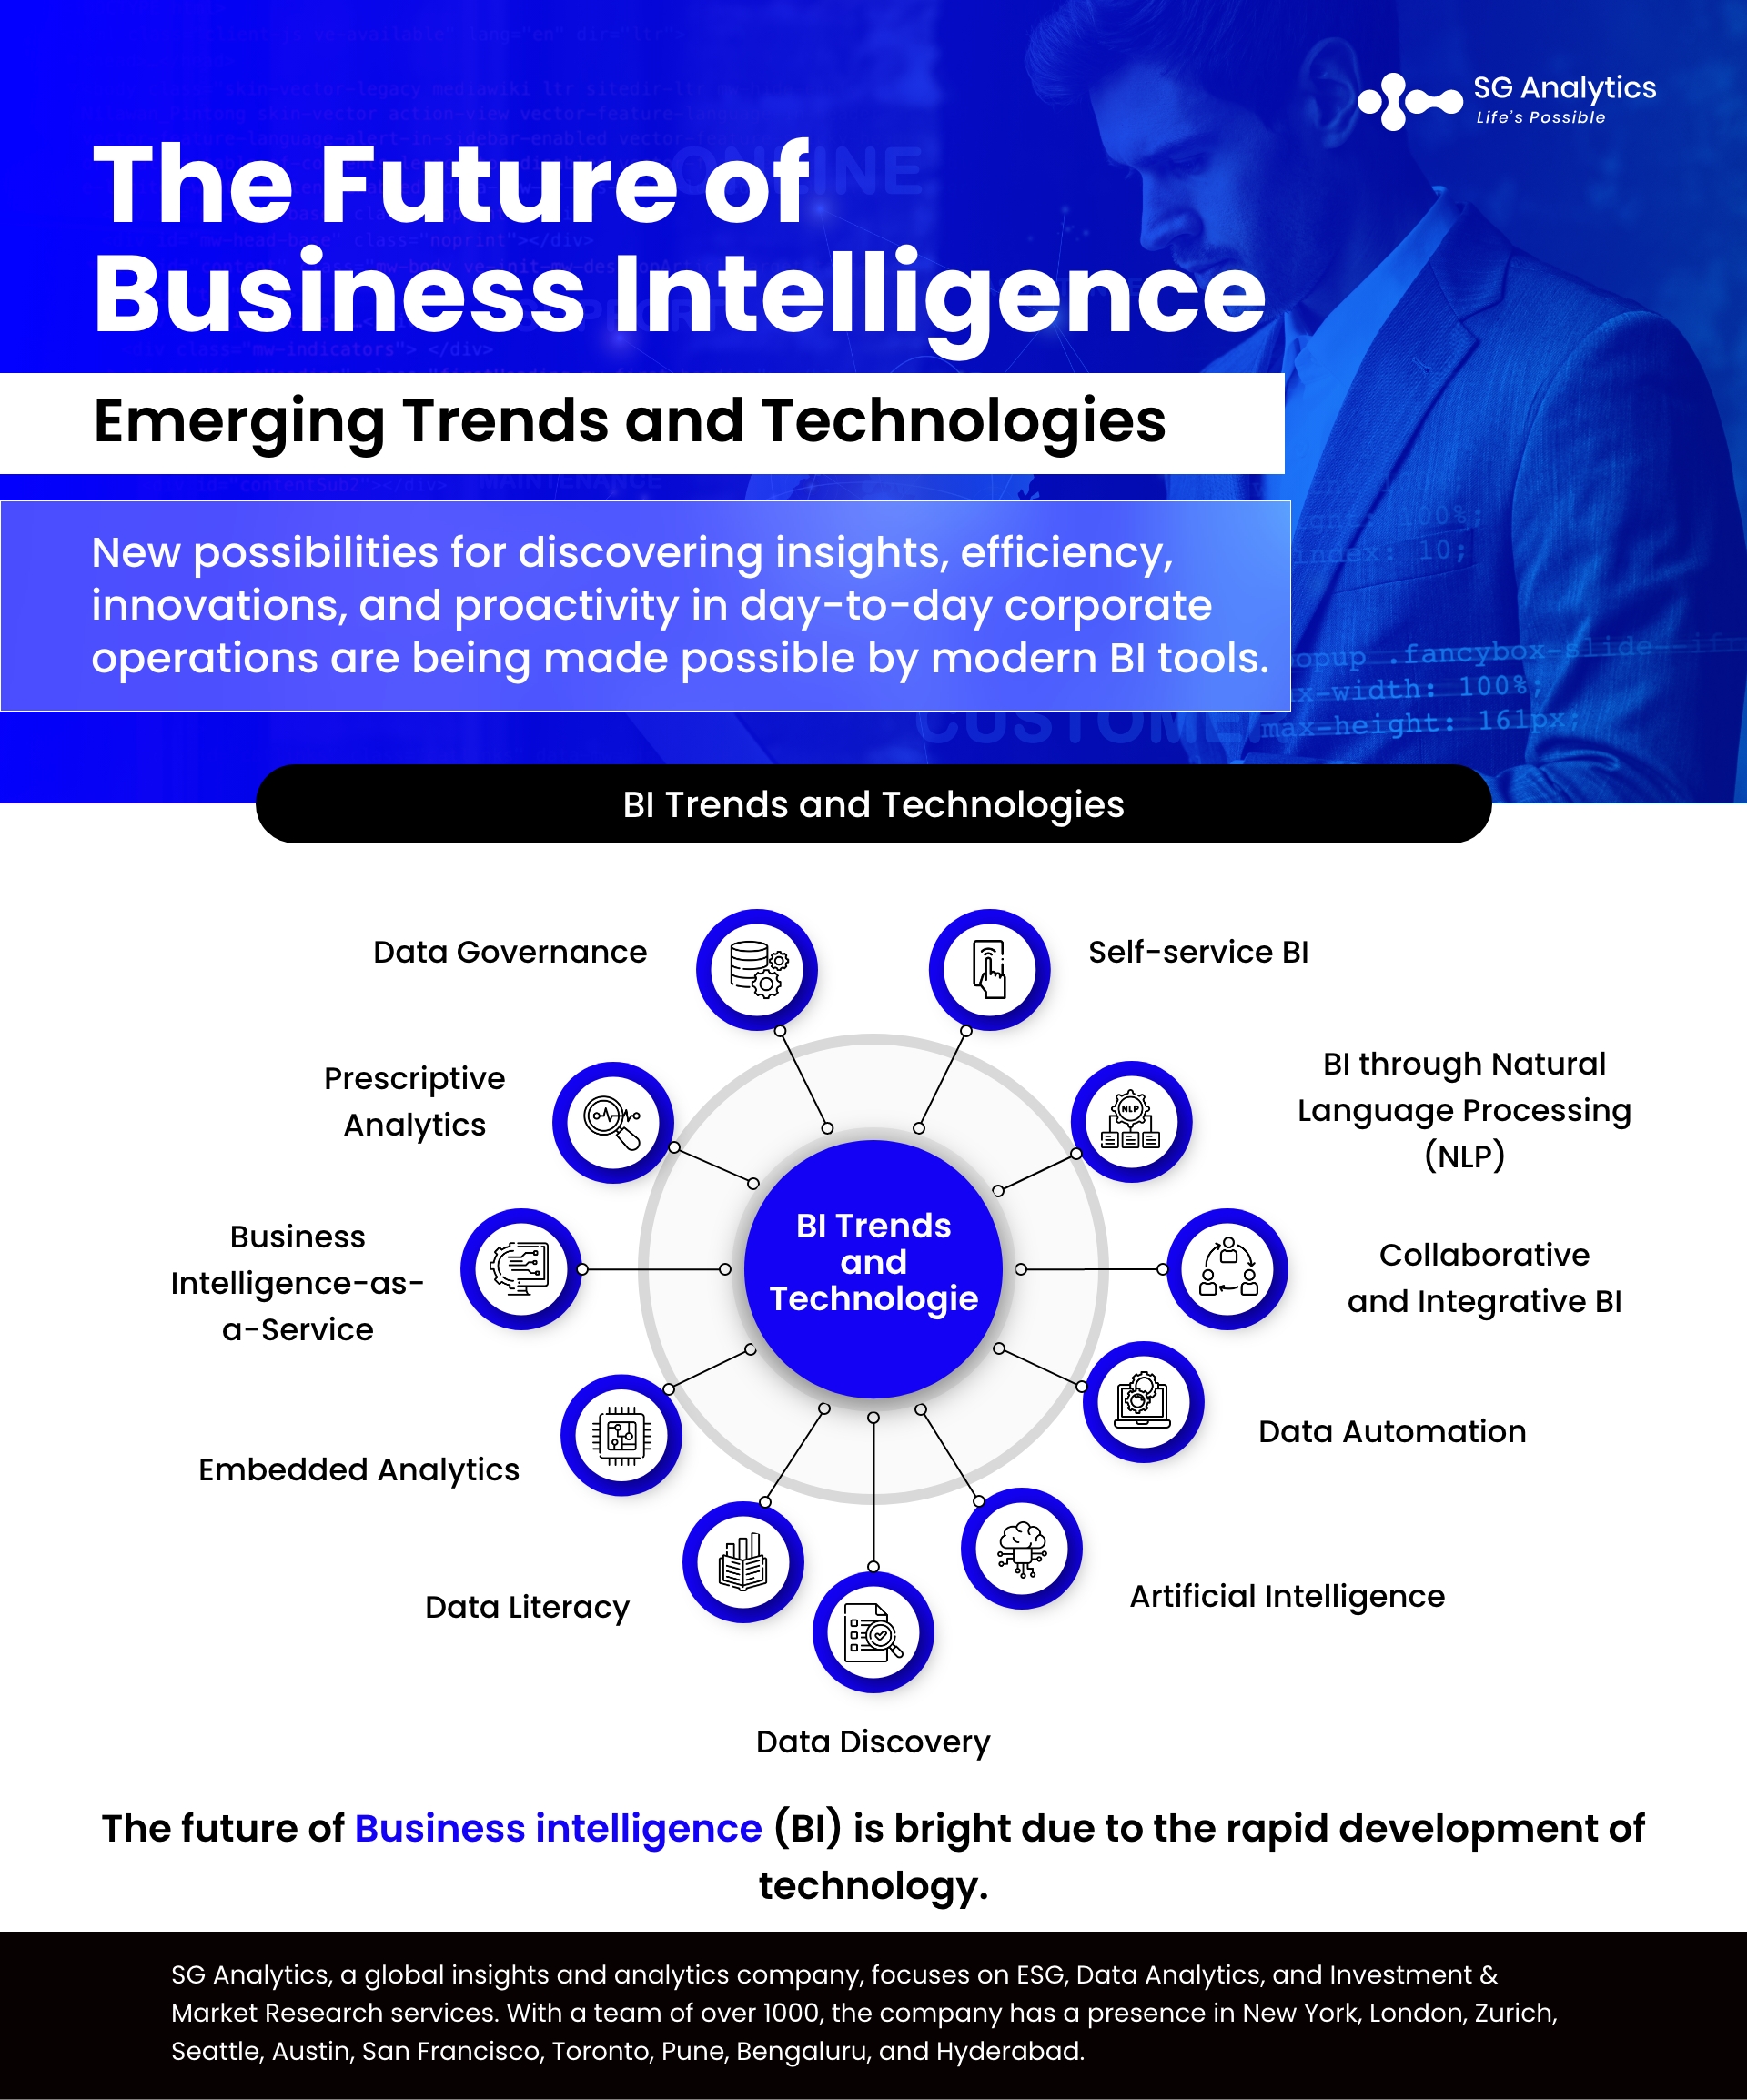 The Future of Business Intelligence - Emerging Trends and Technologies